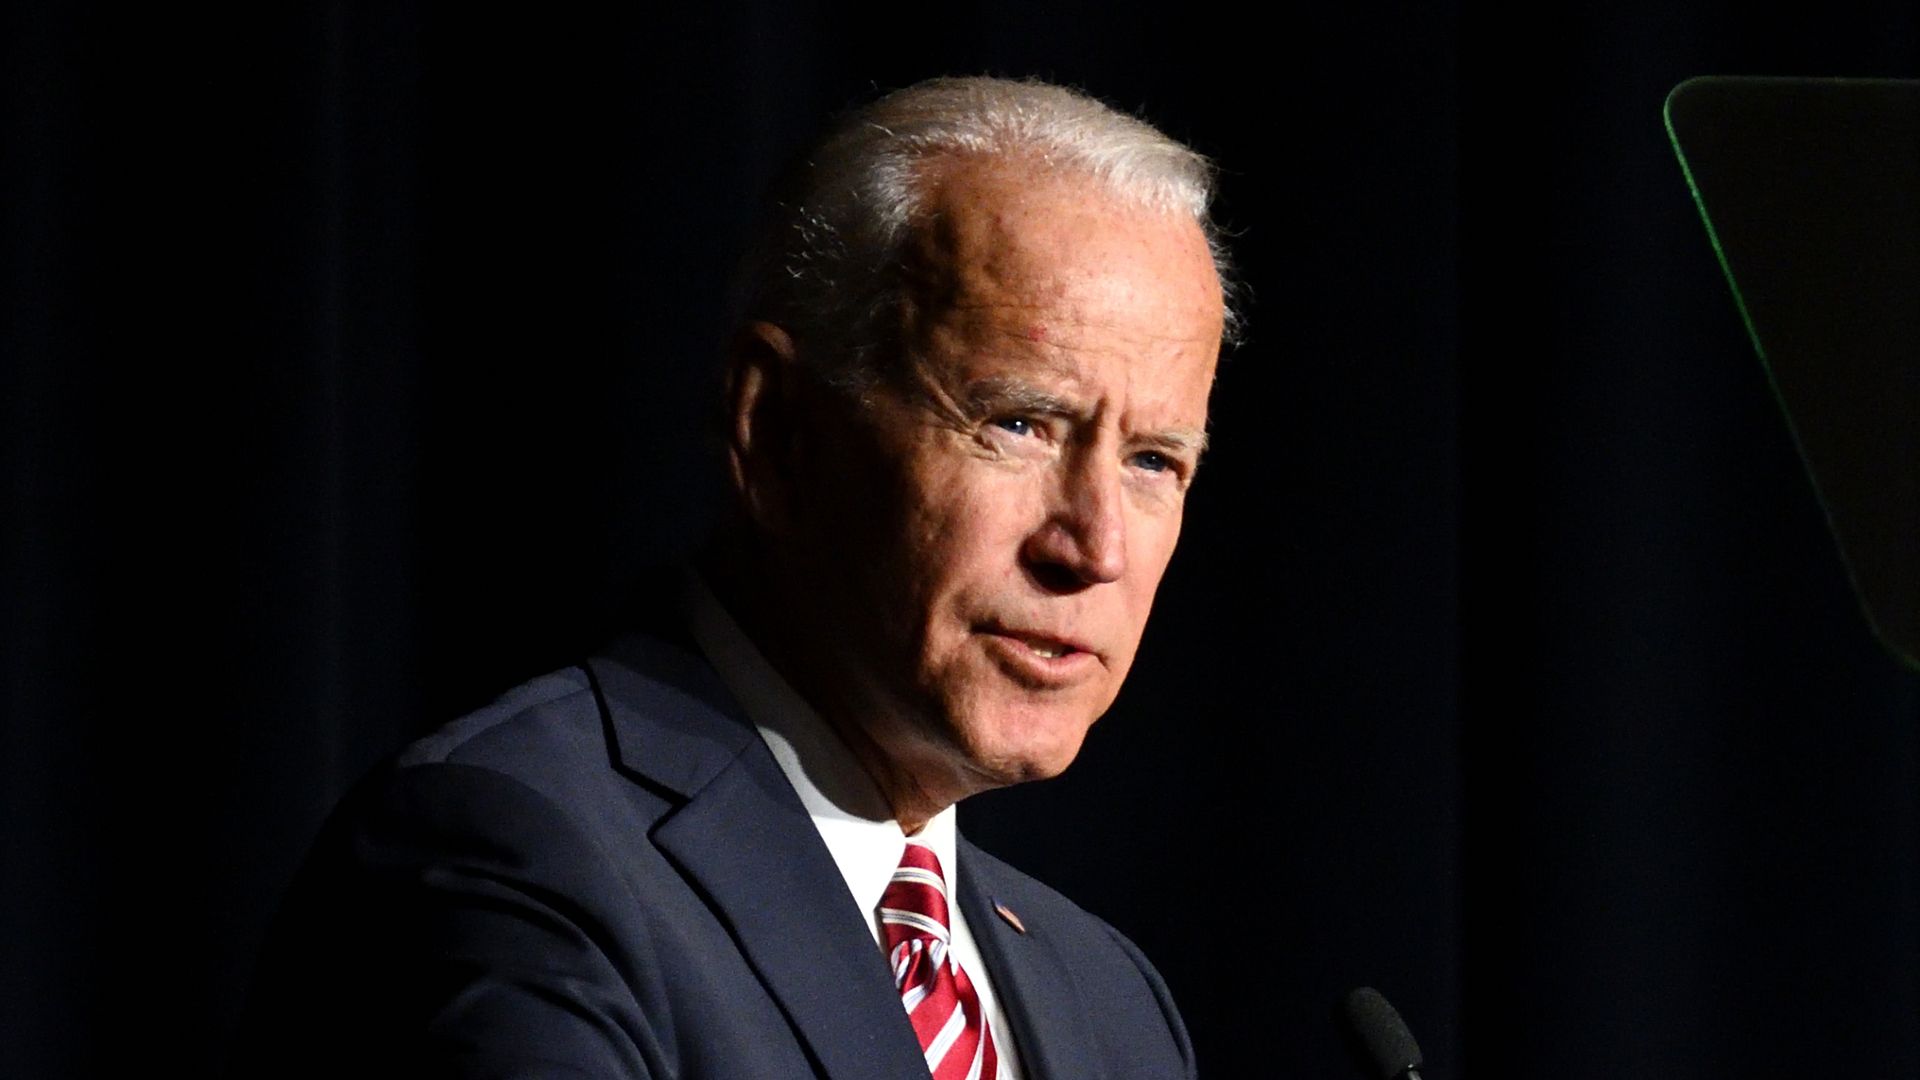 Former Vice President Biden has been accused by 3 other women of inappropriate behavior.